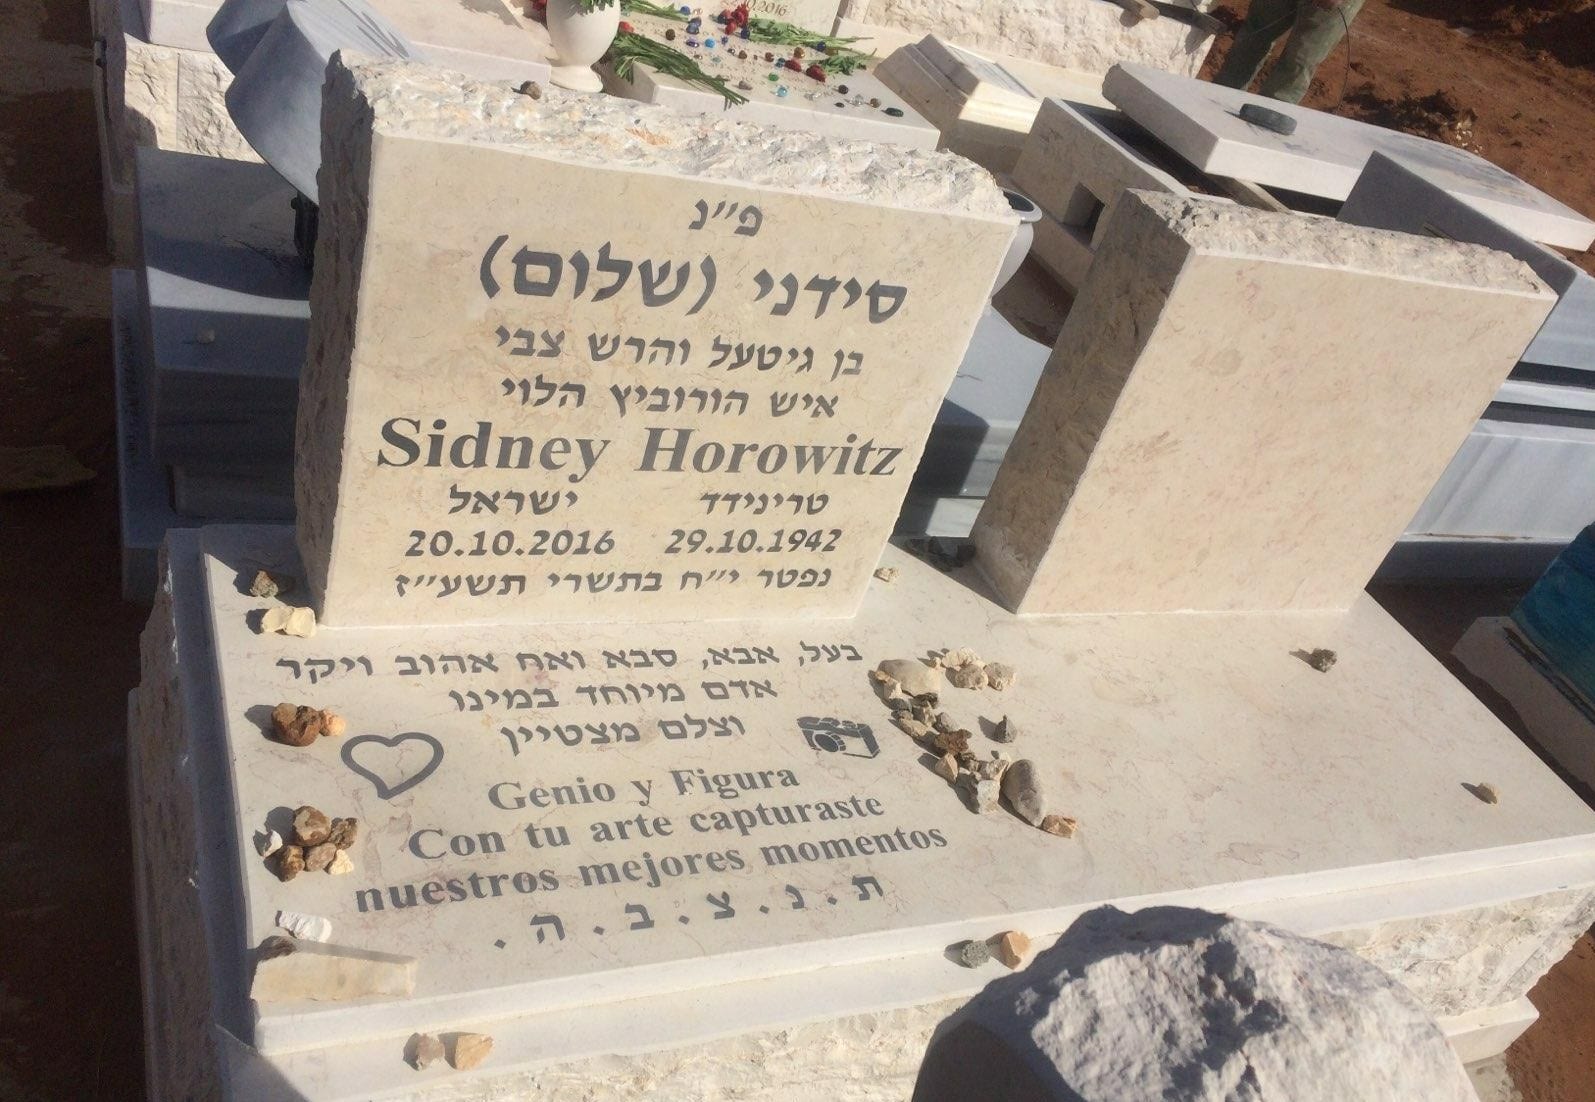 Daniel’s father’s grave in Kfar Saba, Israel, with inscriptions in Hebrew and Spanish